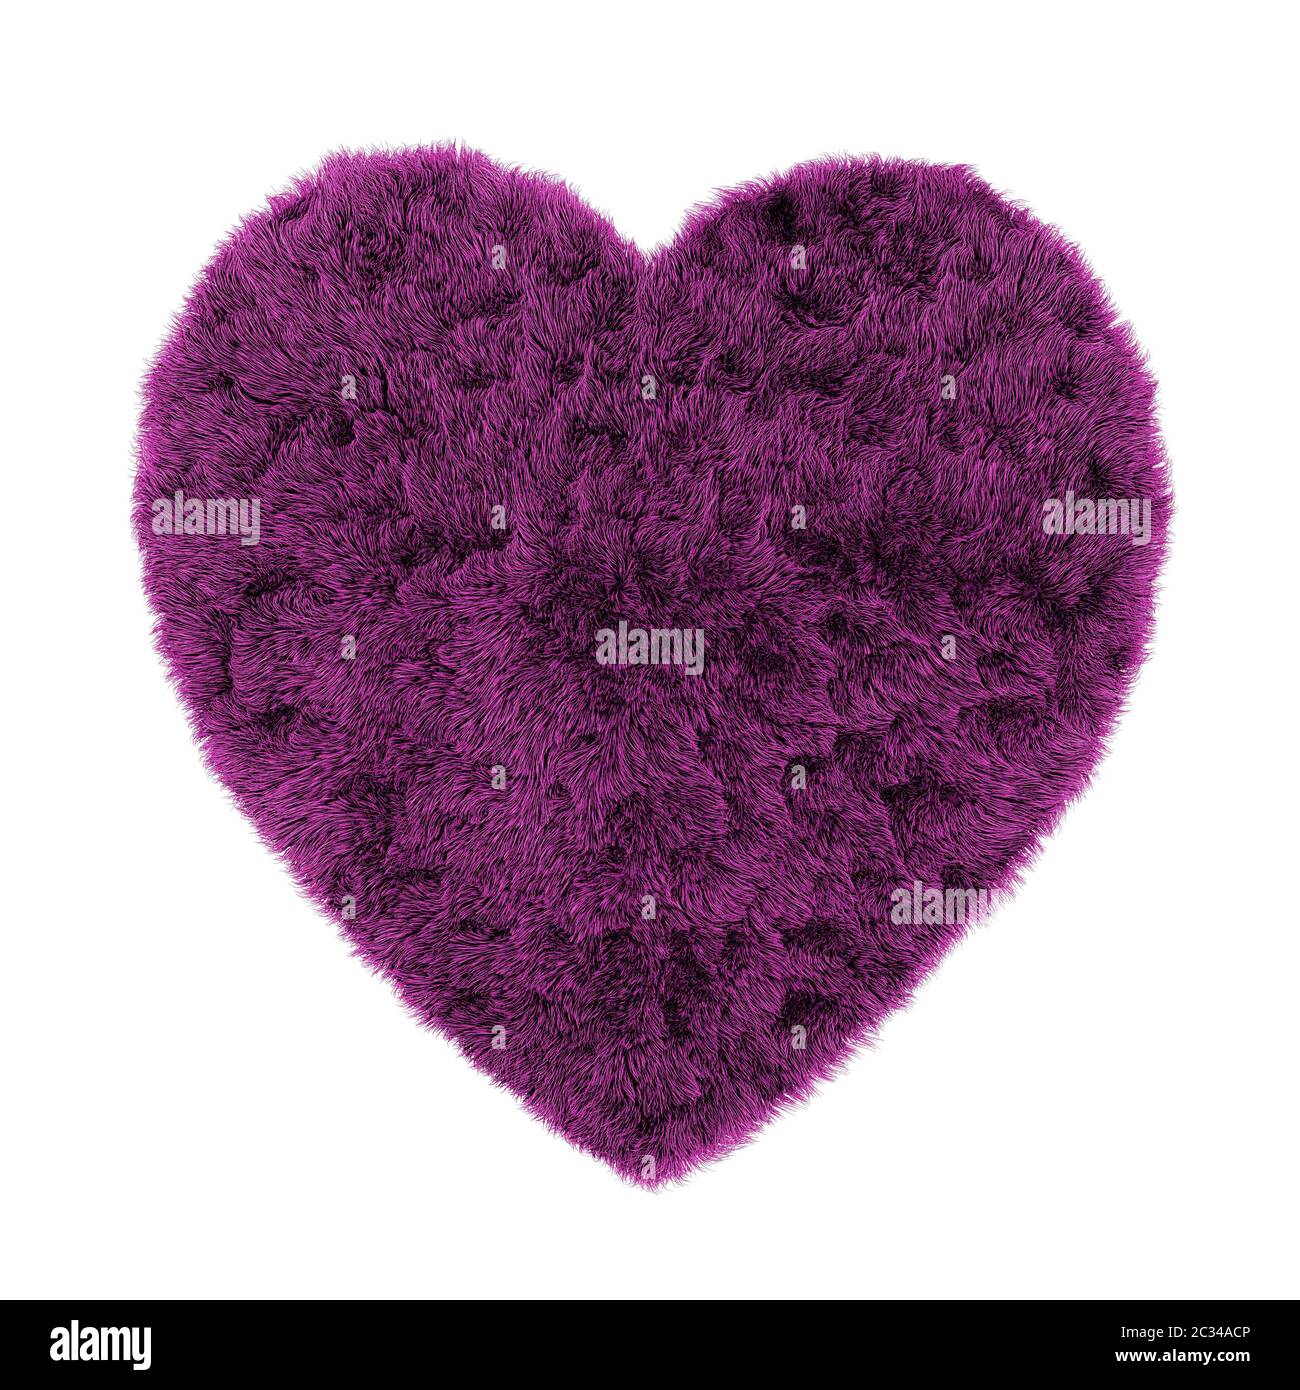 Purple carpet in the shape of a heart made of wool isolated background 3d Stock Photo